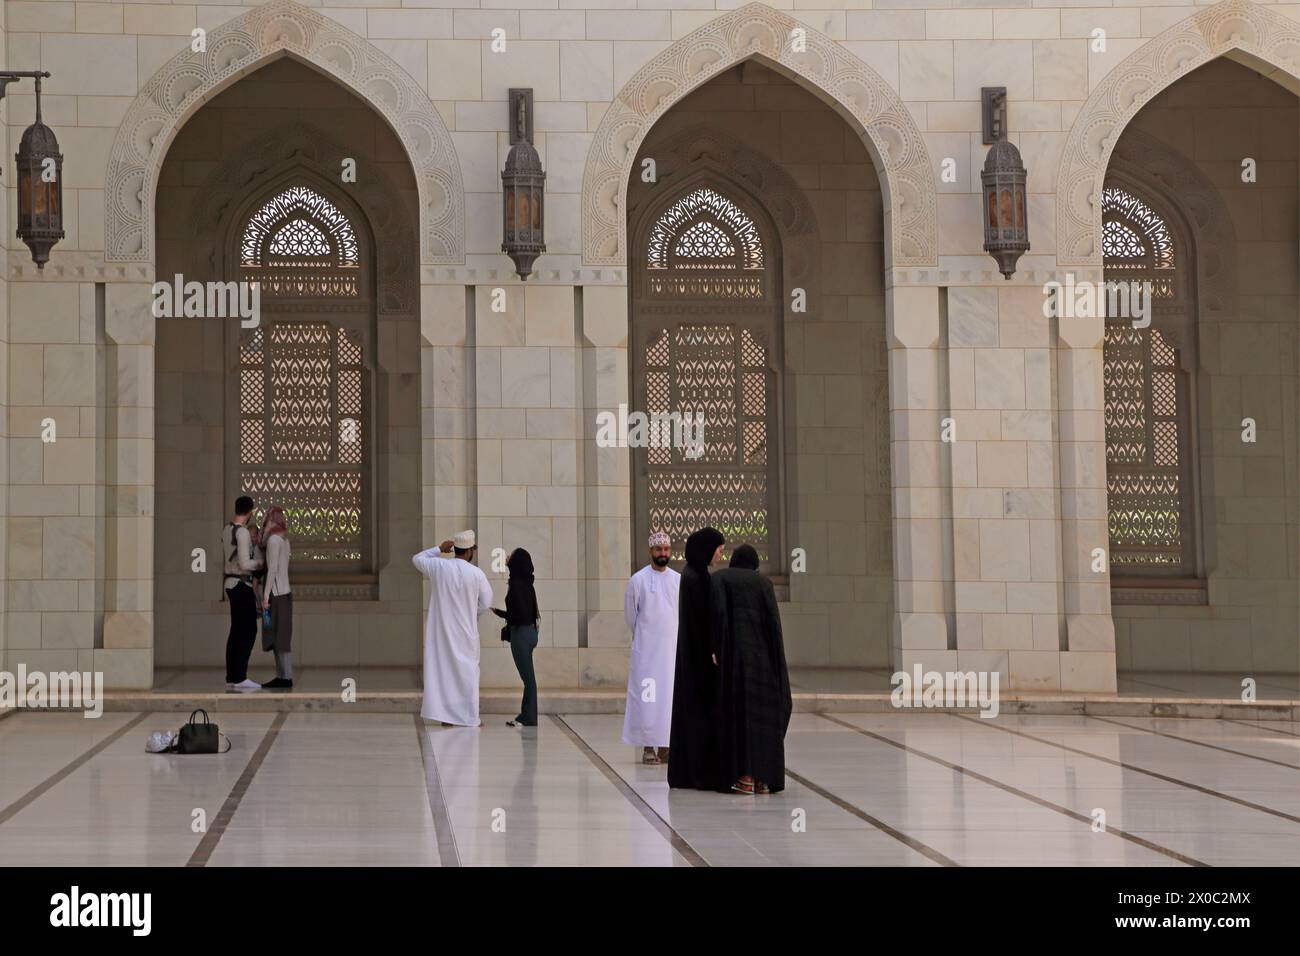 Sultan Qaboos Grand Mosque Visitors in Western and Traditional Dress in Courtyard (Sahn)  Muscat Oman Stock Photo